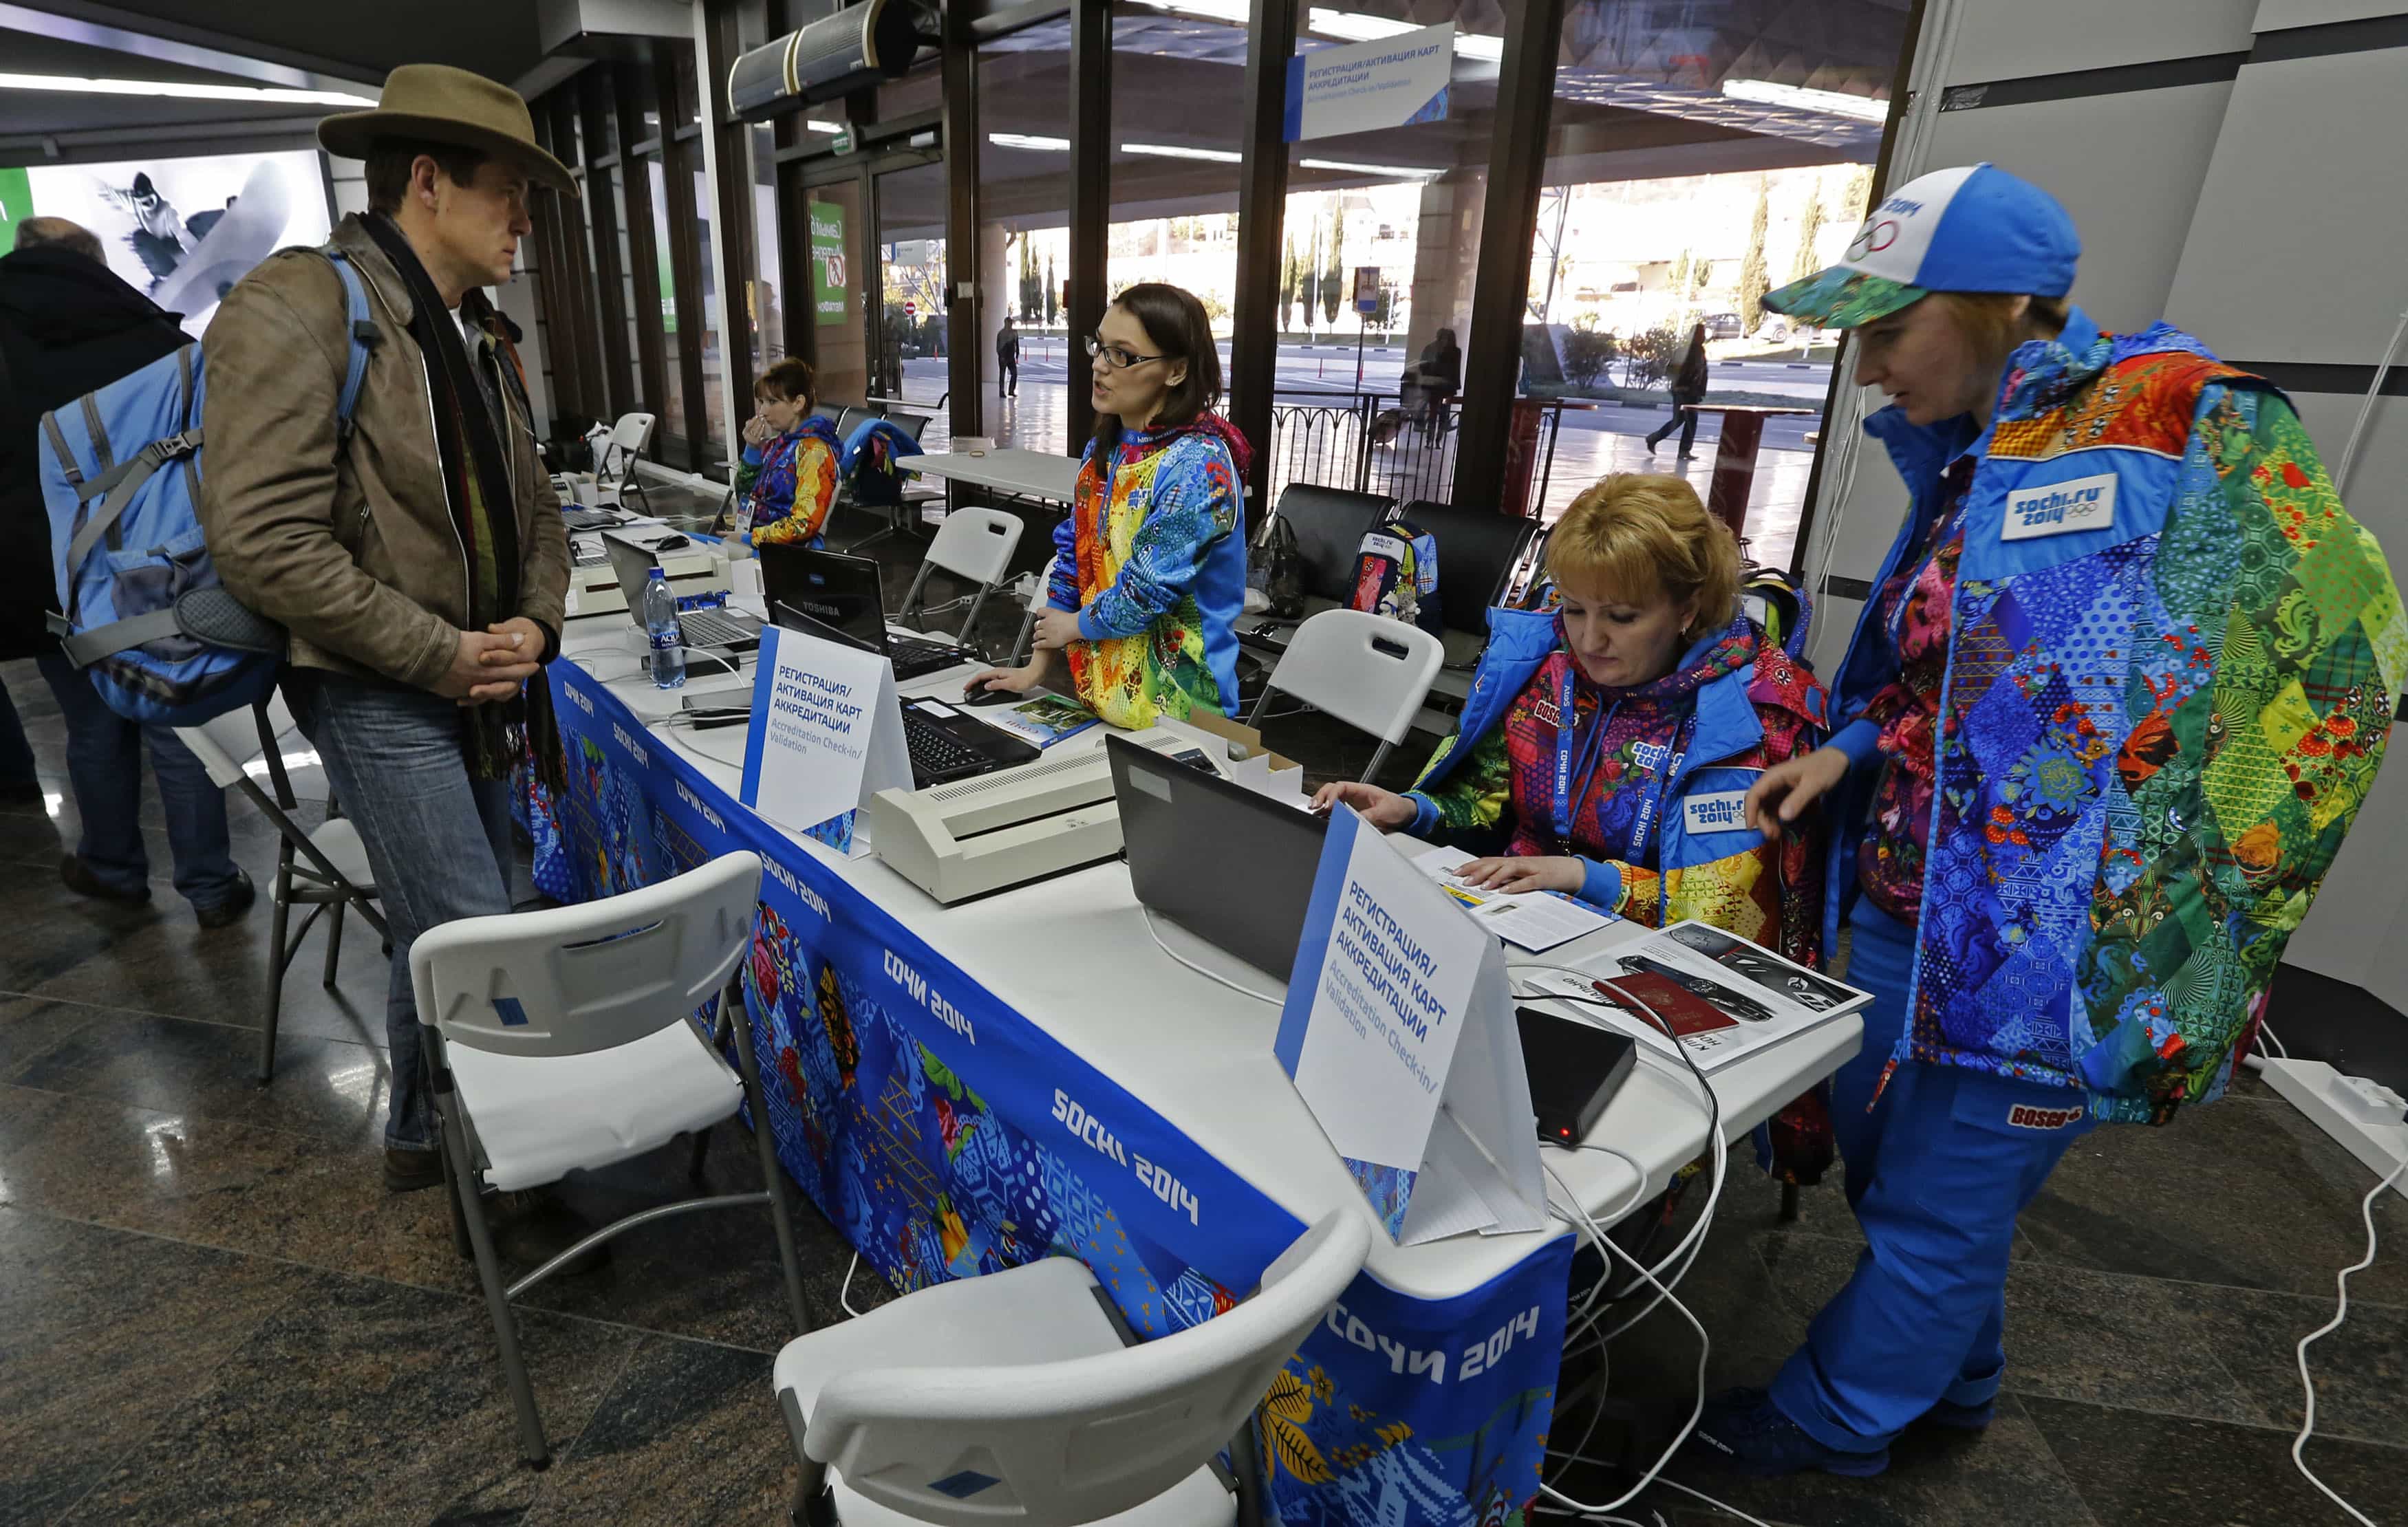 Volunteers assist a journalist with his accreditation for the 2014 Winter Olympics Games in Sochi's airport in Adler, 15 January 2014., REUTERS/Alexander Demianch